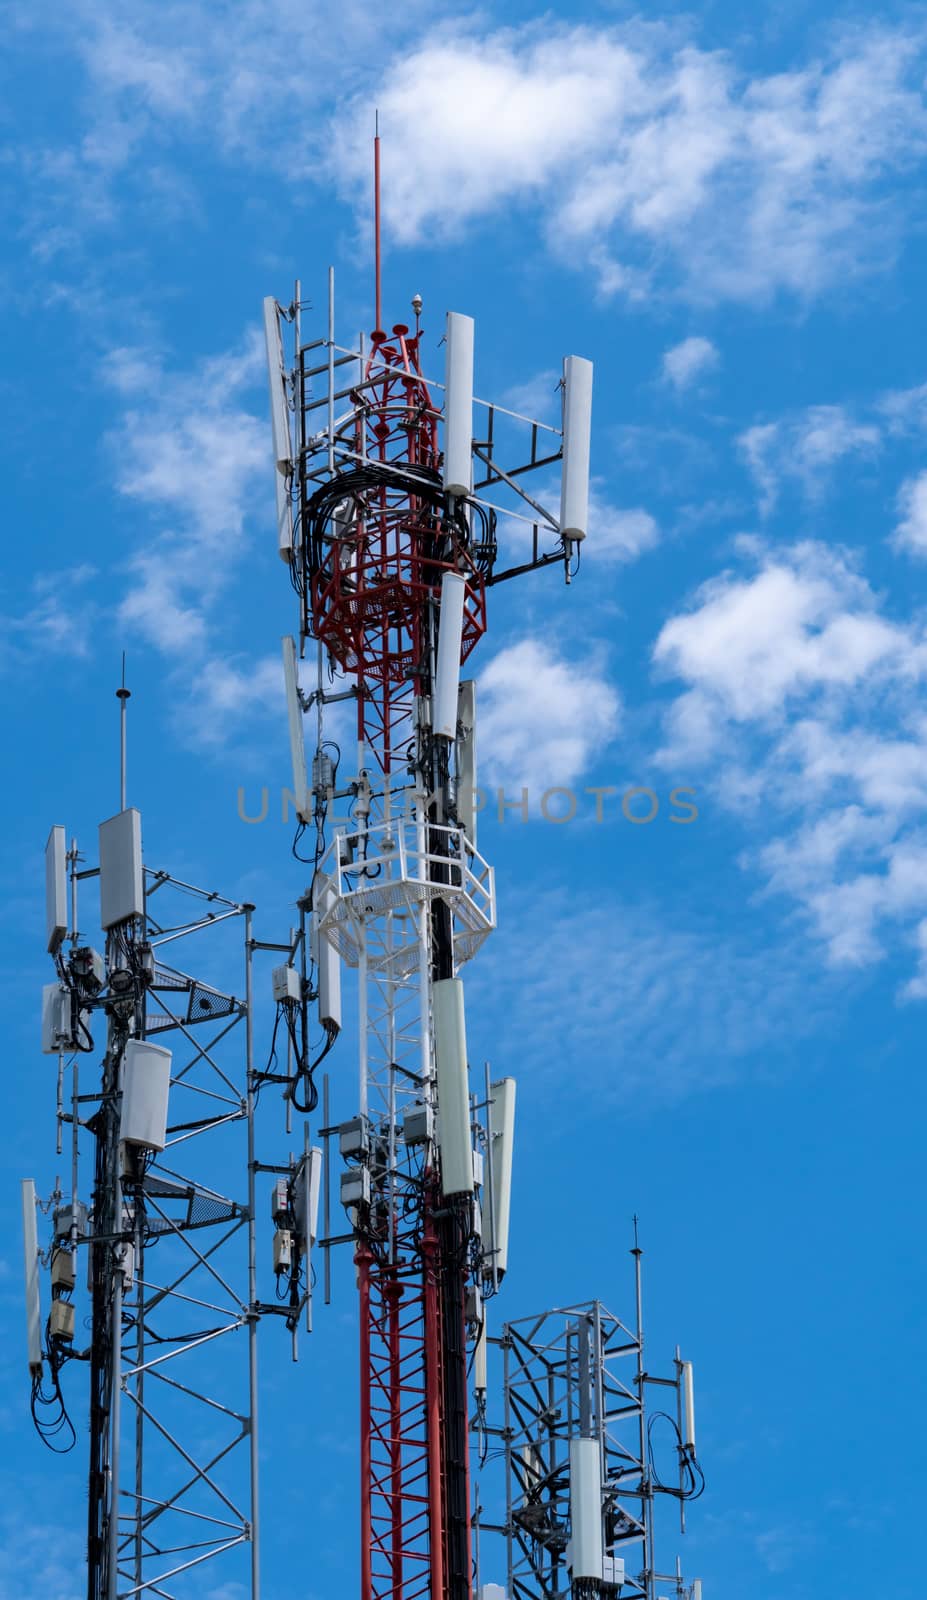 Telecommunication tower with blue sky and white clouds background. Antenna on blue sky. Radio and satellite pole. Communication technology. Telecommunication industry. Mobile or telecom 4g network.